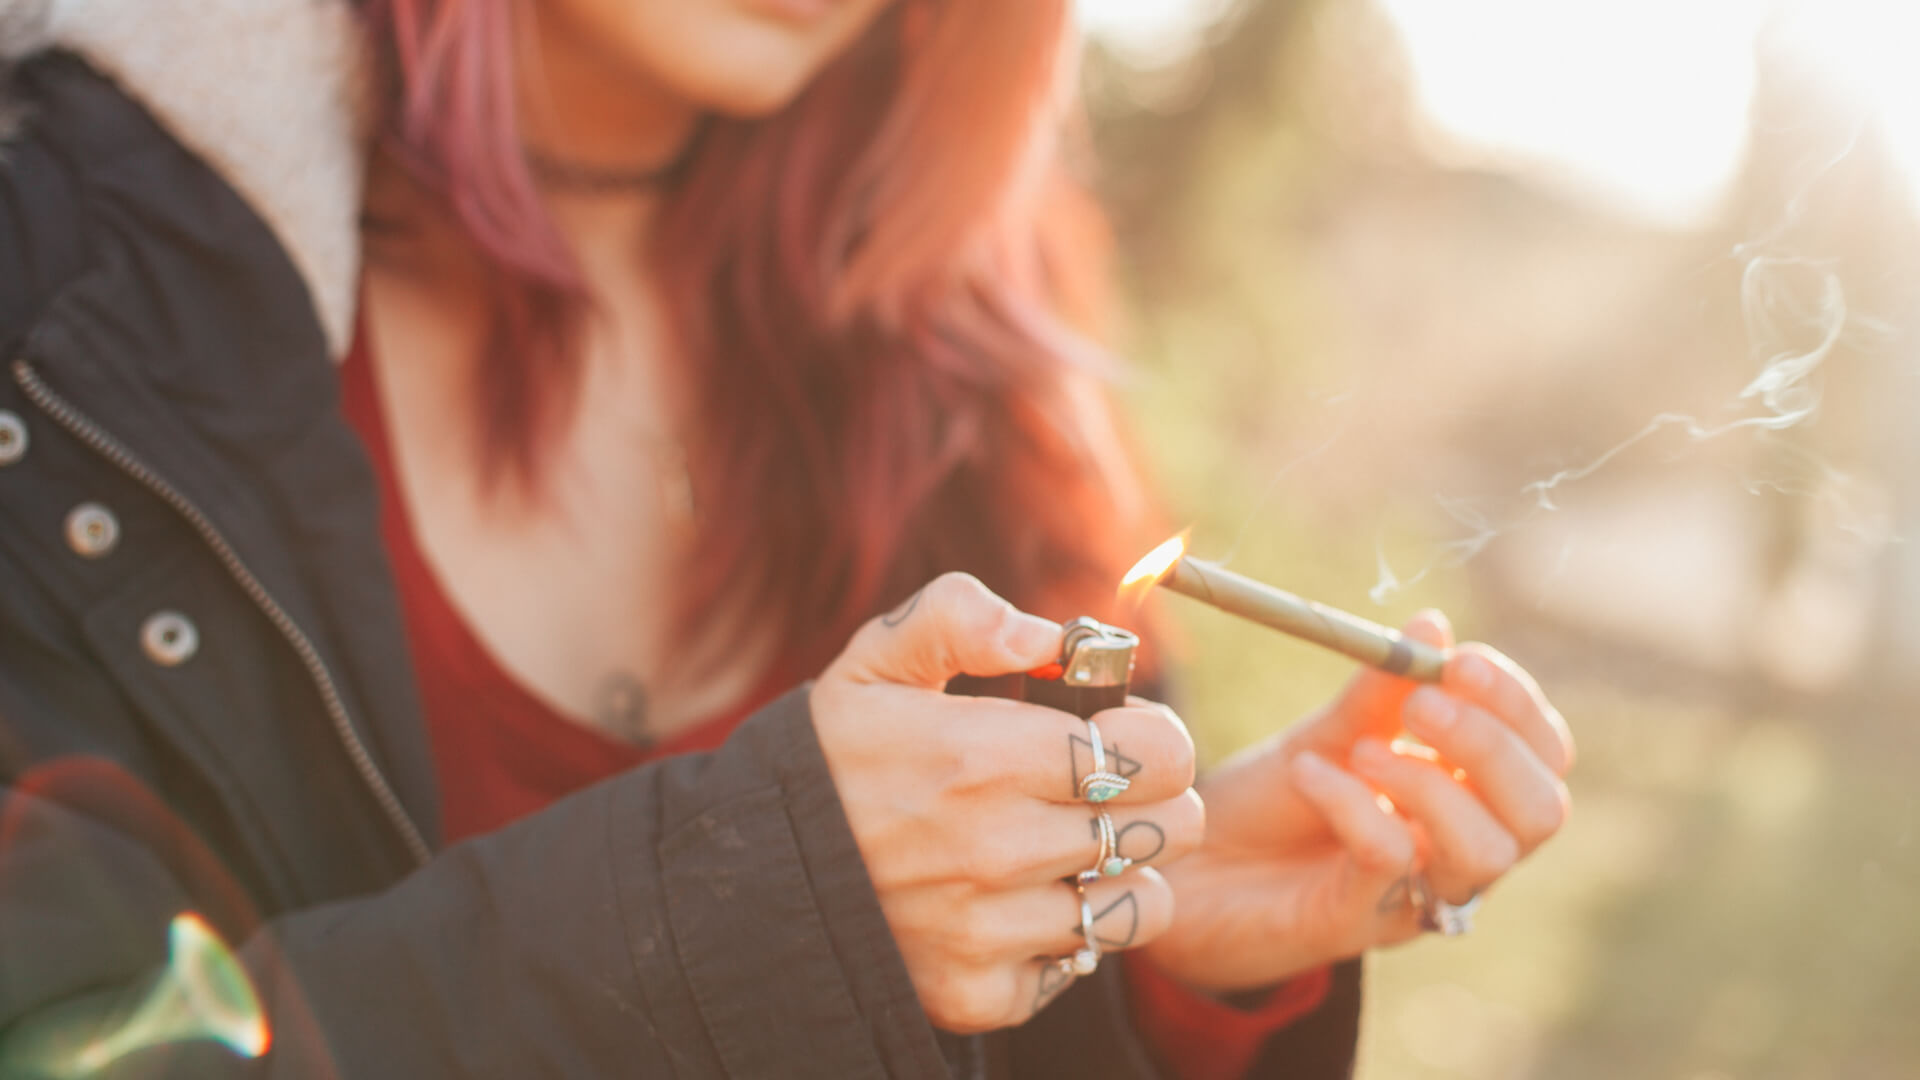 A woman lighting a joint